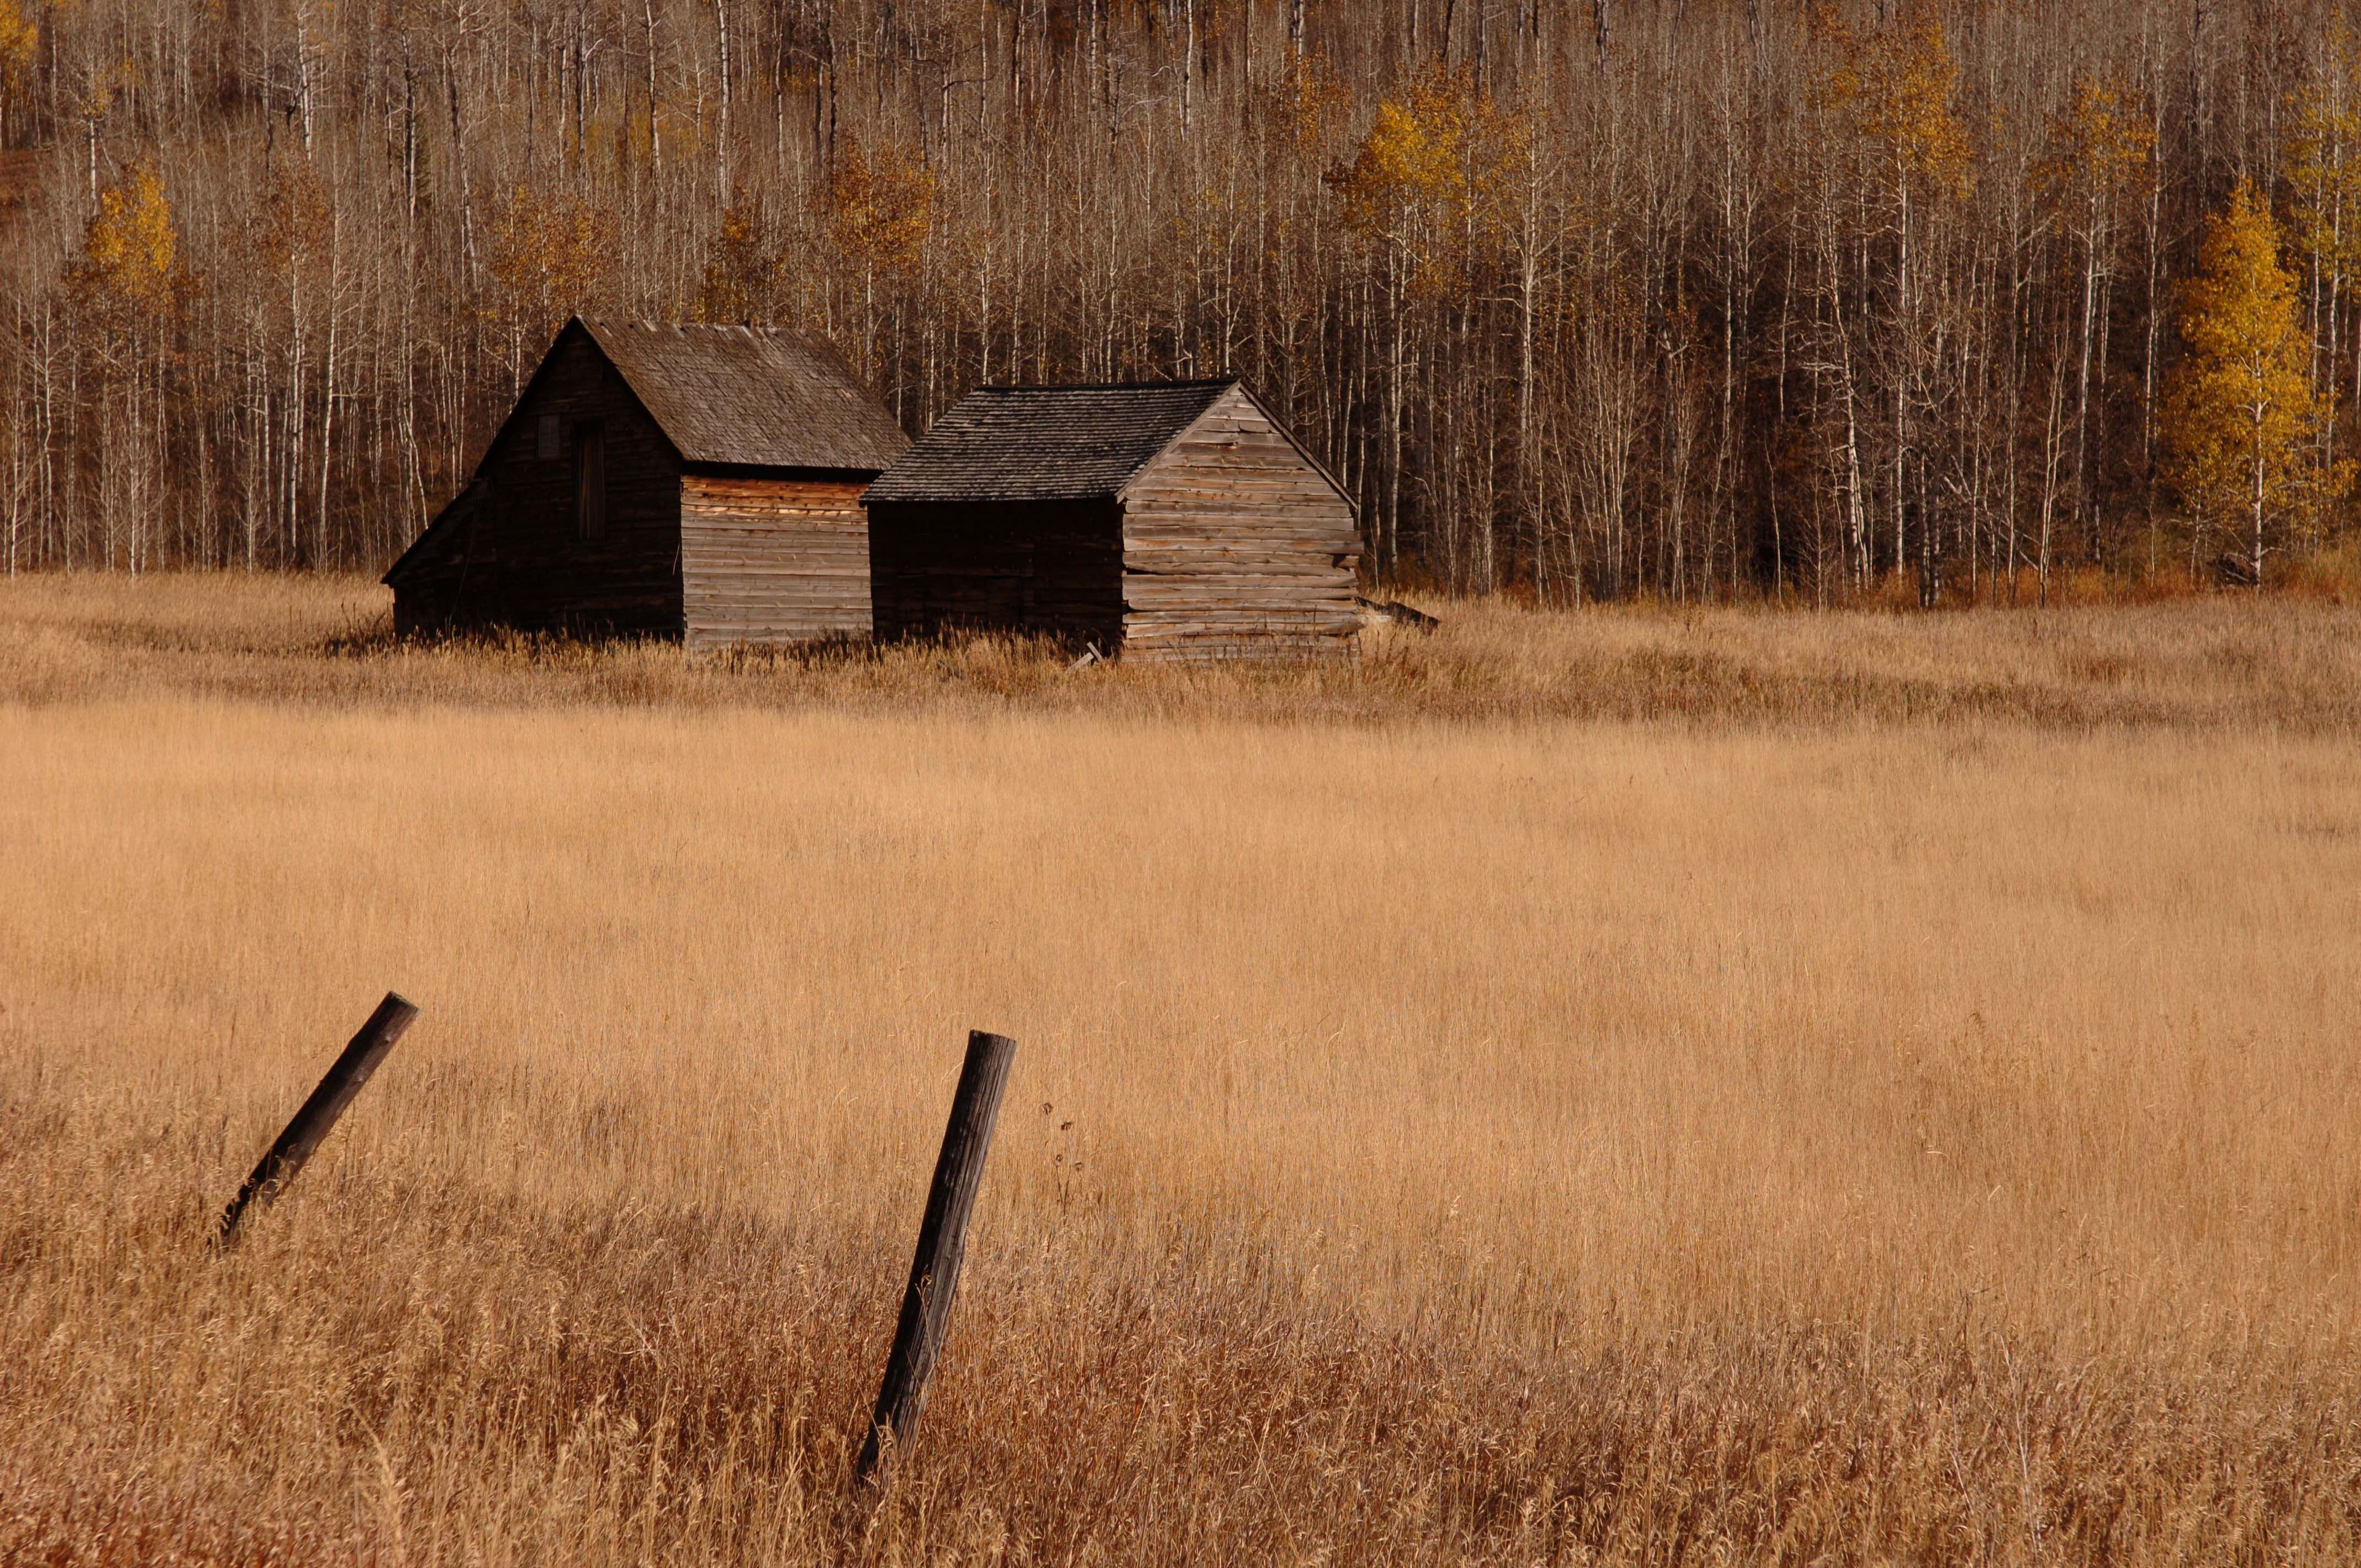 Two cabins in a field, with trees with sparse yellow leaves in the background and two fence posts in the foreground.